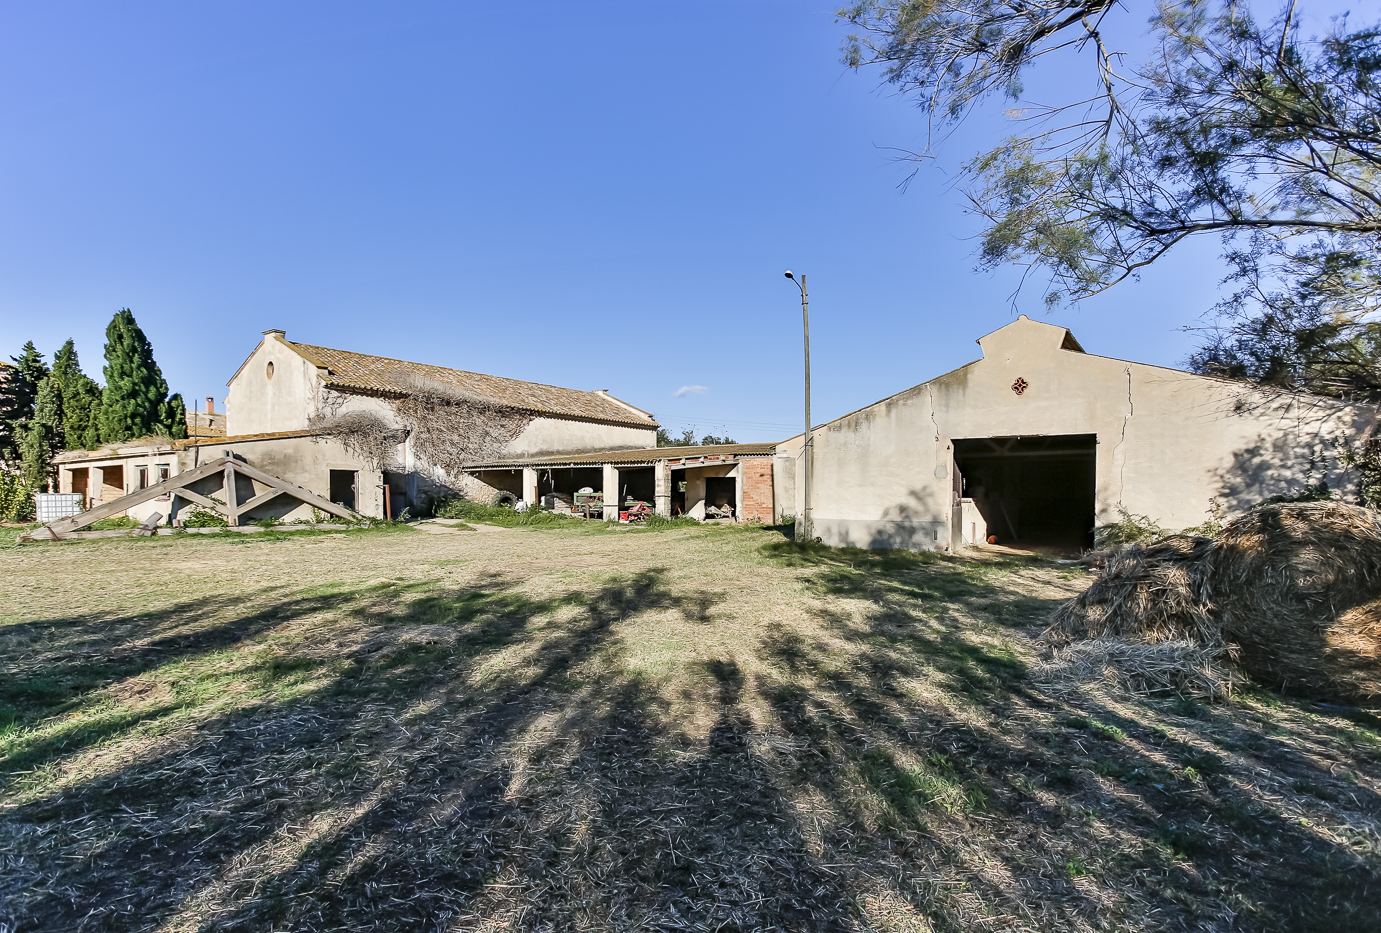 Exclusive farm surrounded by flat fields 10 minutes from the beach